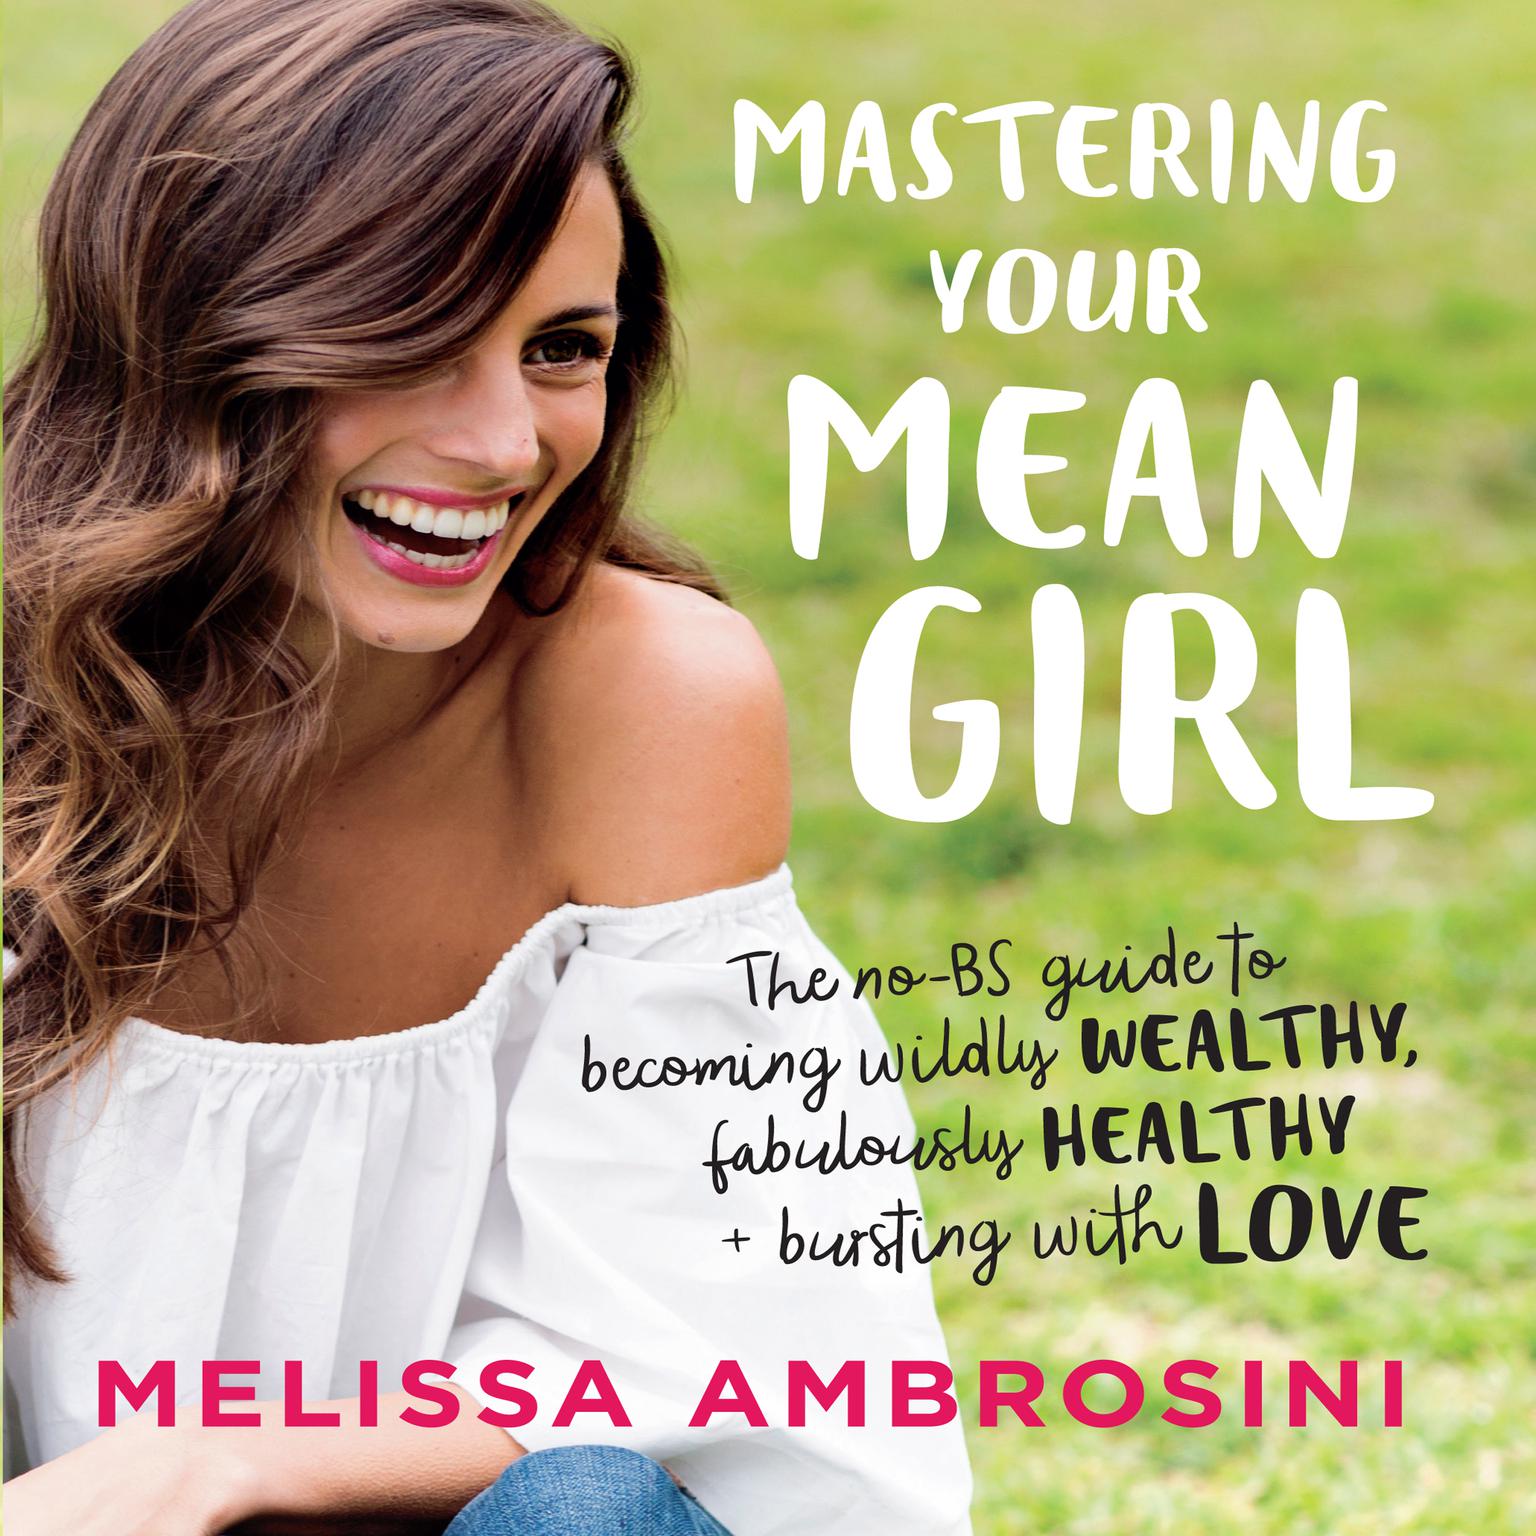 Mastering Your Mean Girl: The No-BS Guide to Silencing Your Inner Critic and Becoming Wildly Wealthy, Fabulously Healthy, and Bursting with Love Audiobook, by Melissa Ambrosini